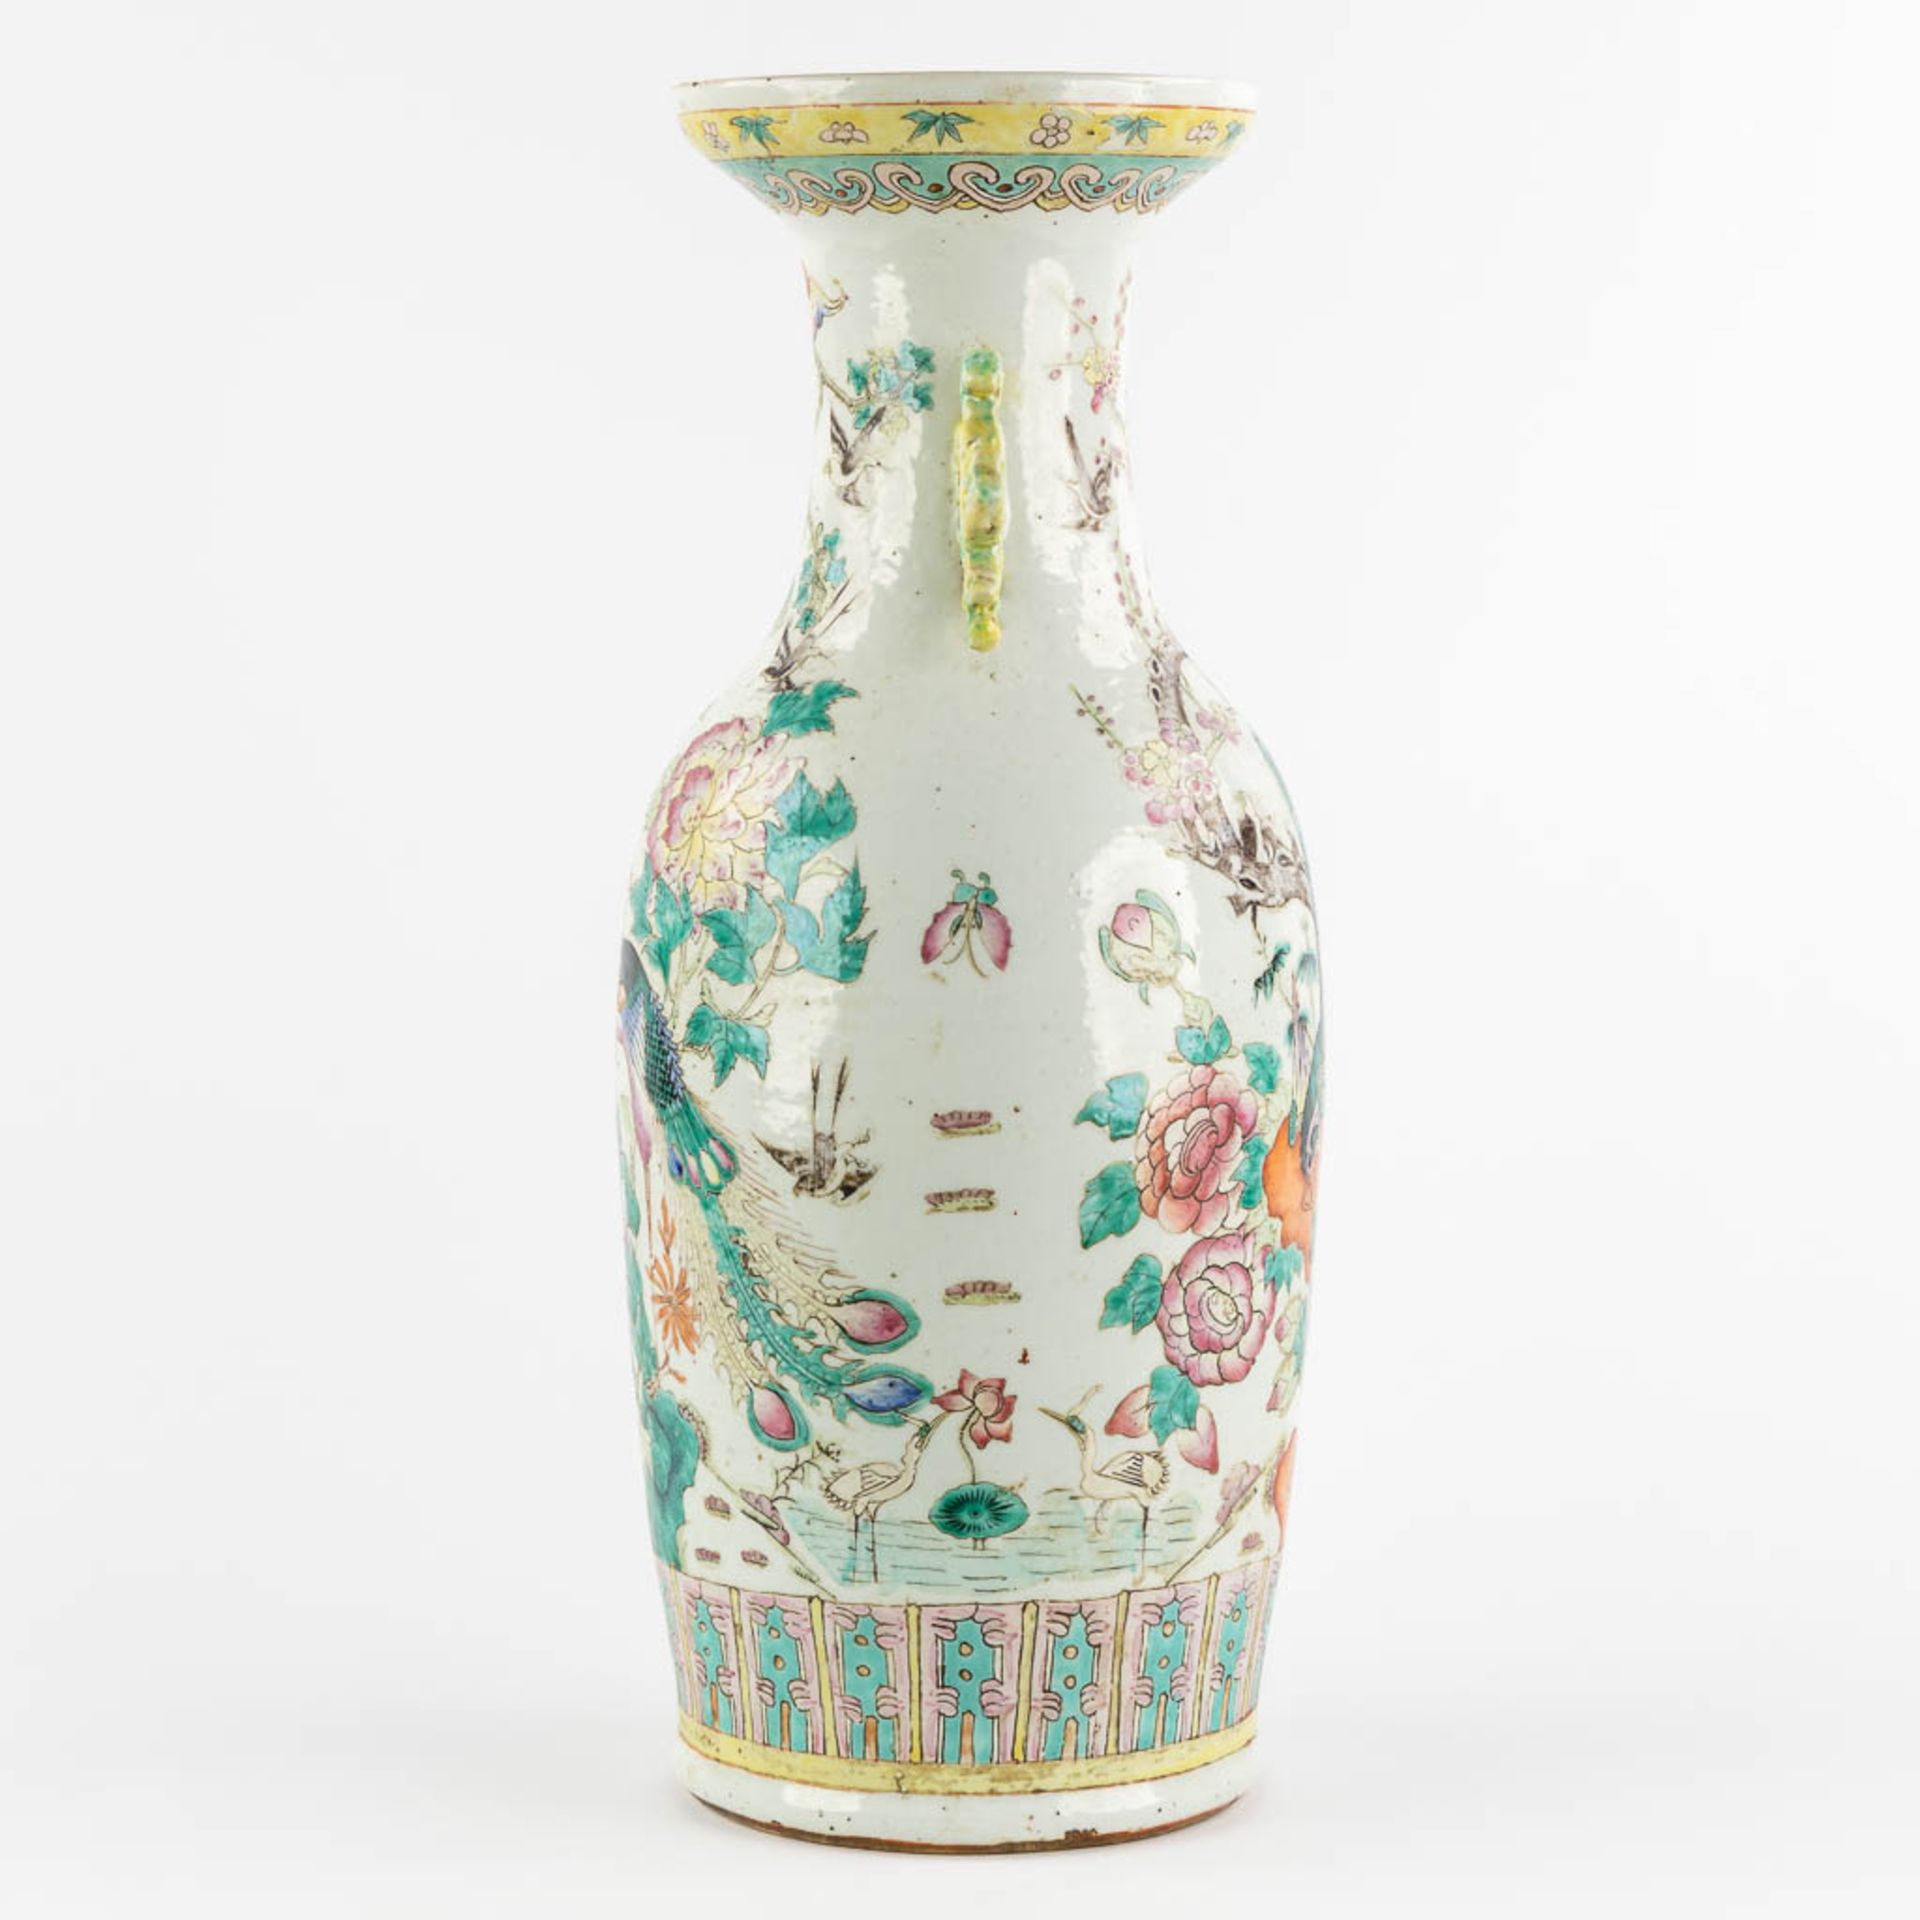 A Chinese Vase, Famille Rose decorated with Fauna and Flora. (H:60 x D:25 cm) - Image 6 of 12